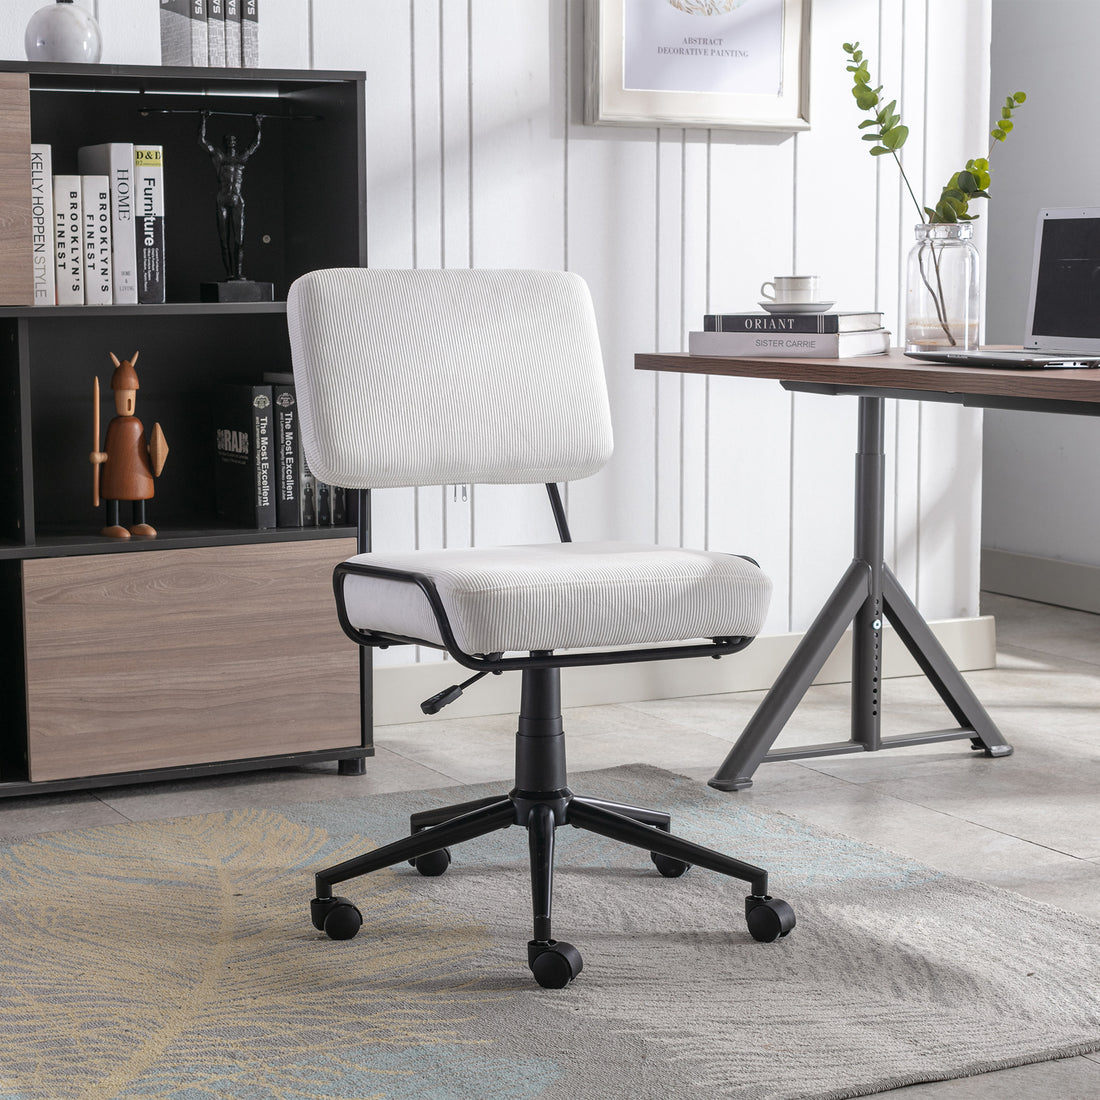 Corduroy Desk Chair Task Chair Home Office Chair white-office-foam-dry clean-modern-handle-office